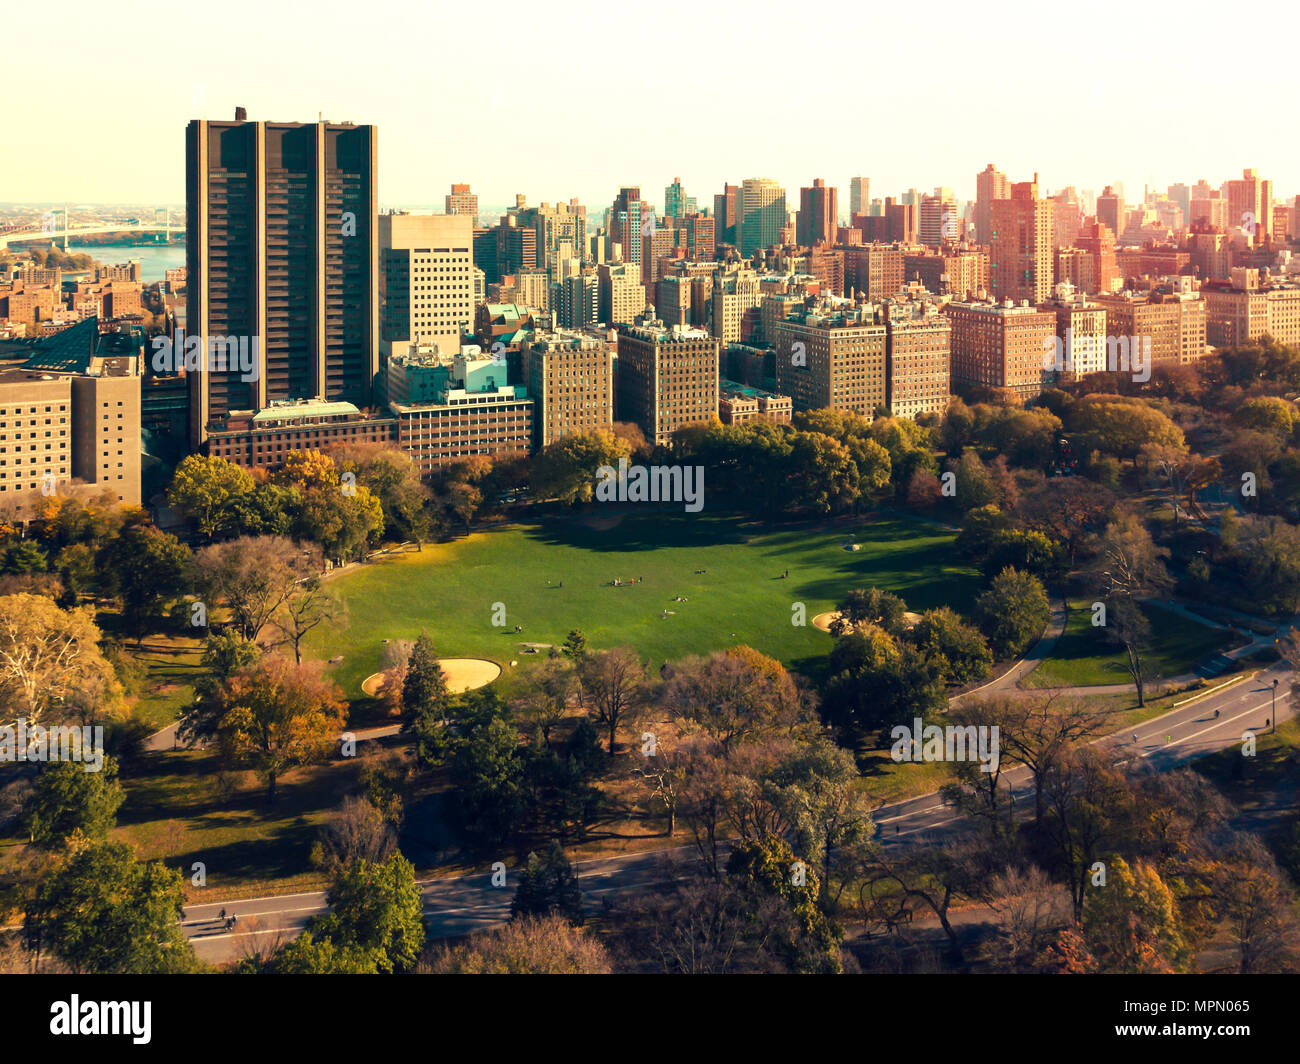 Central park baseball court with tall buildings in the background Stock Photo